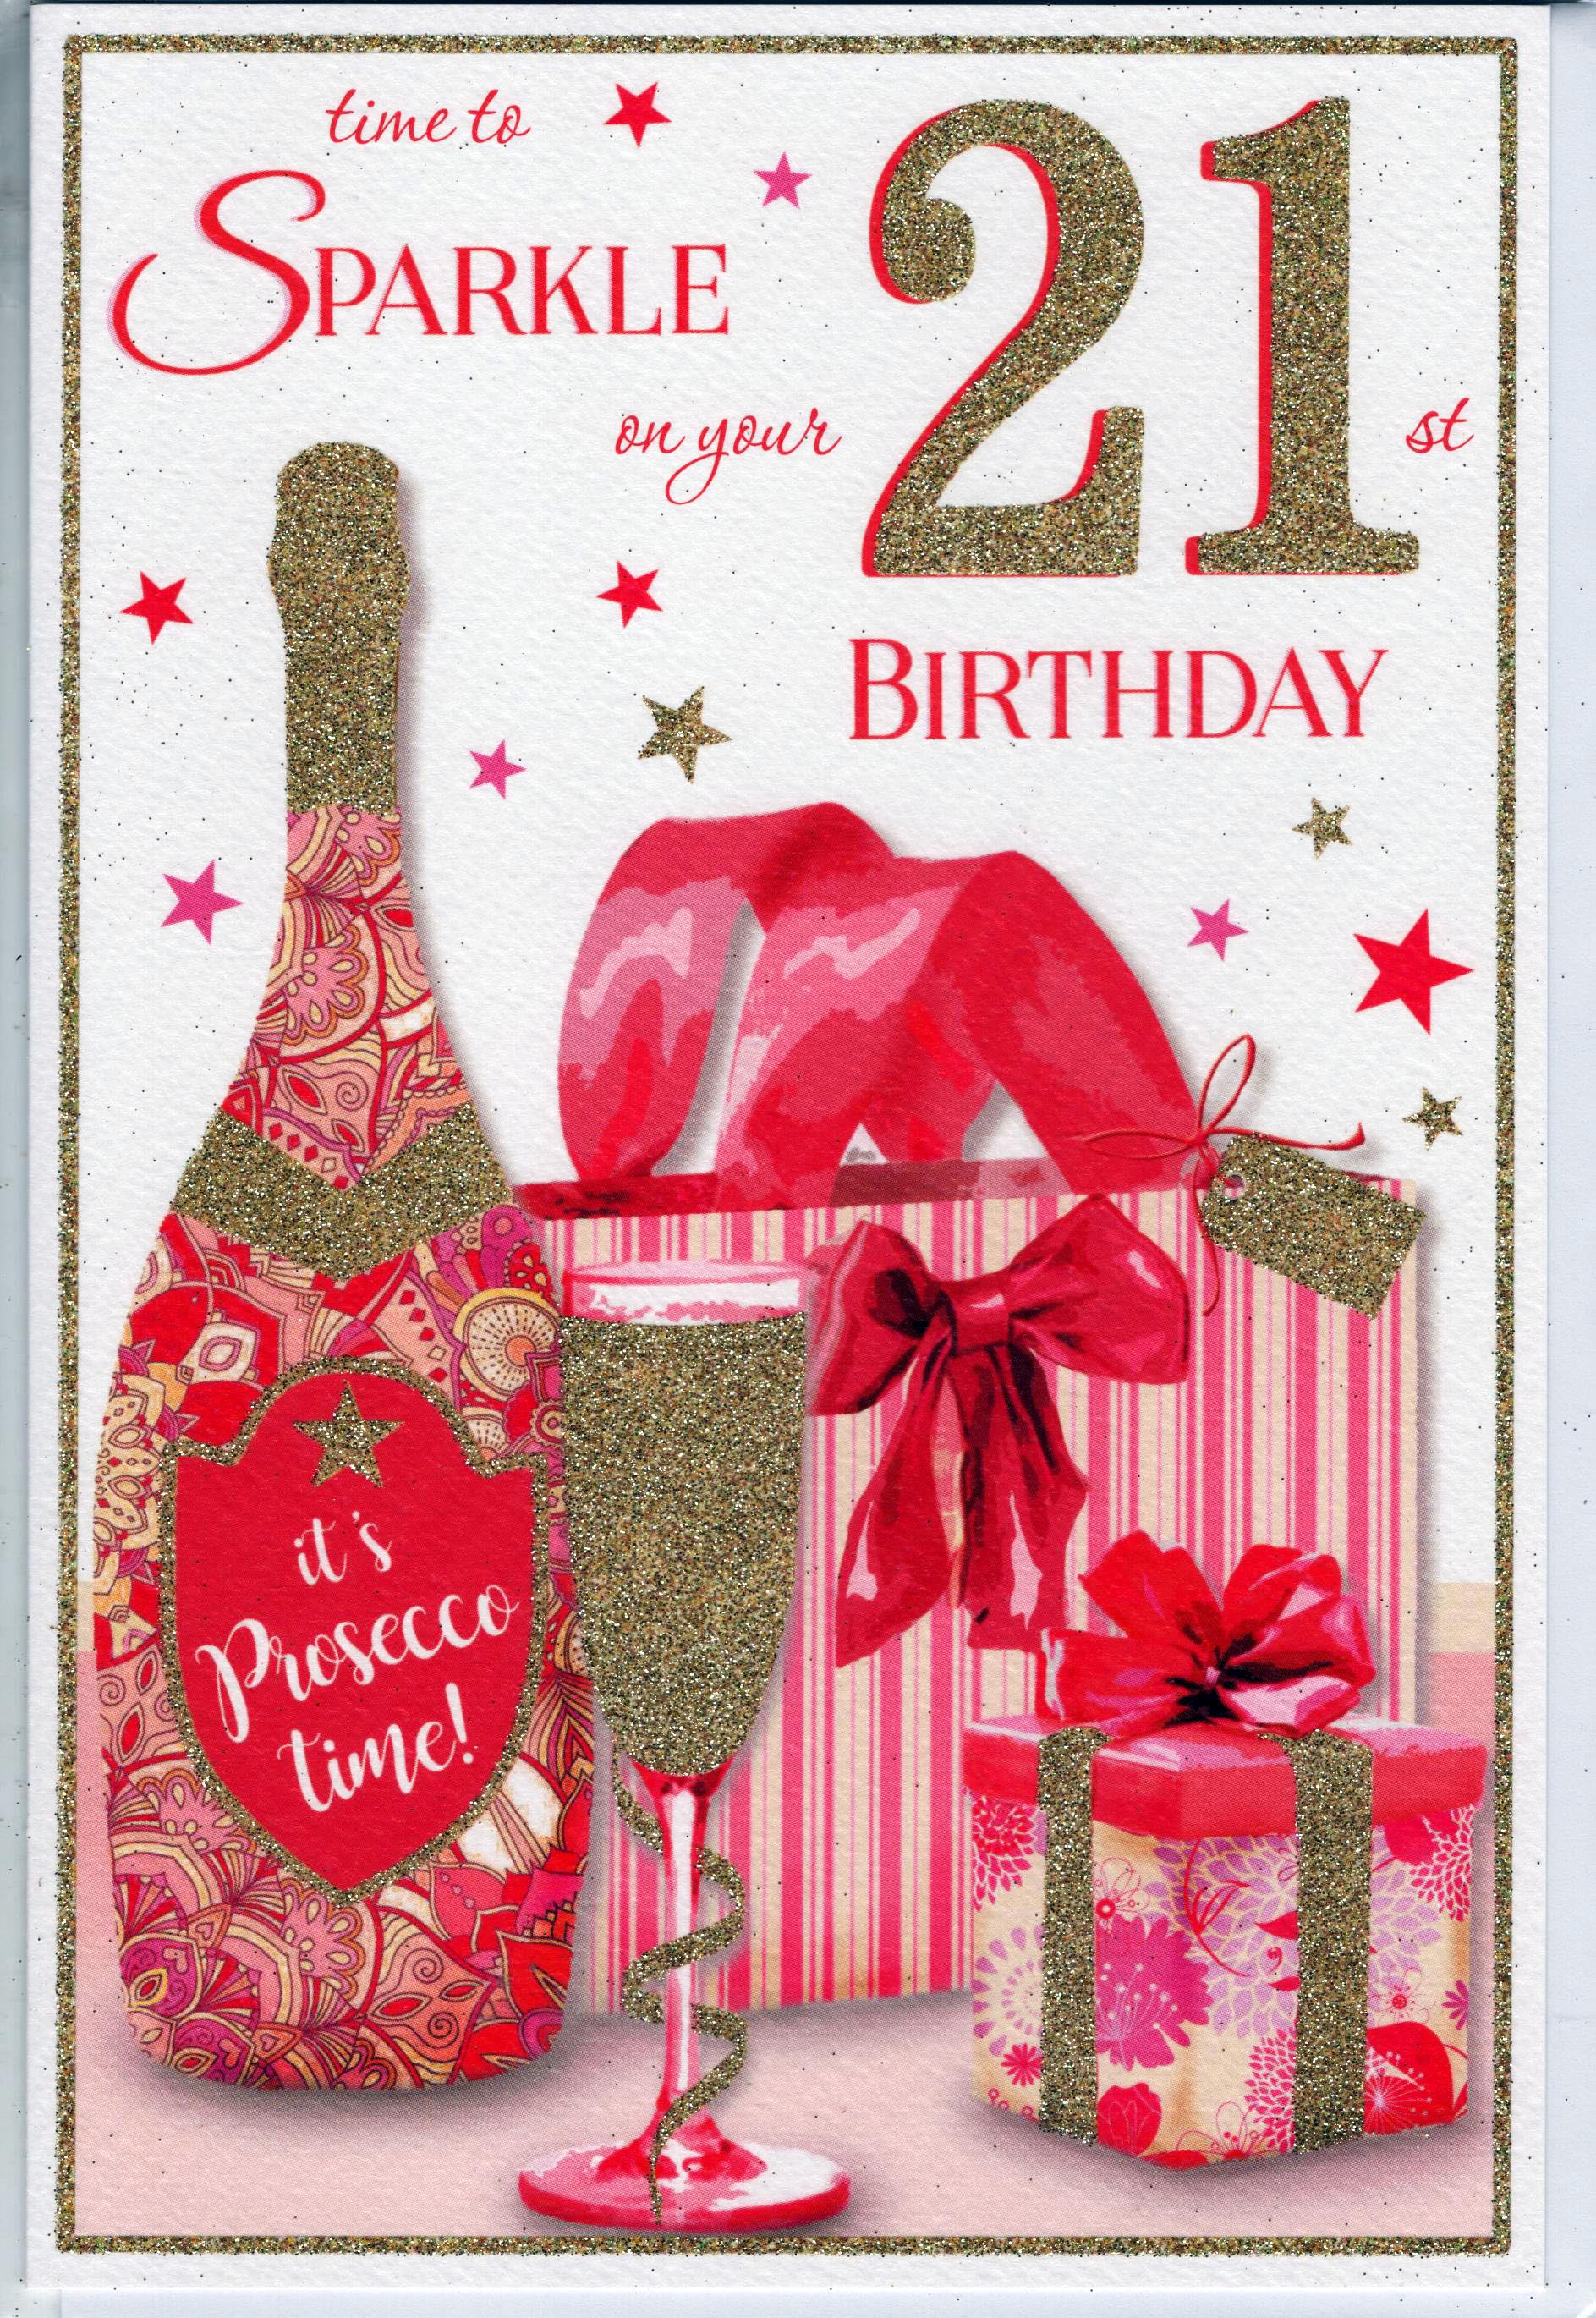 Time to Sparkle On Your 21st Birthday